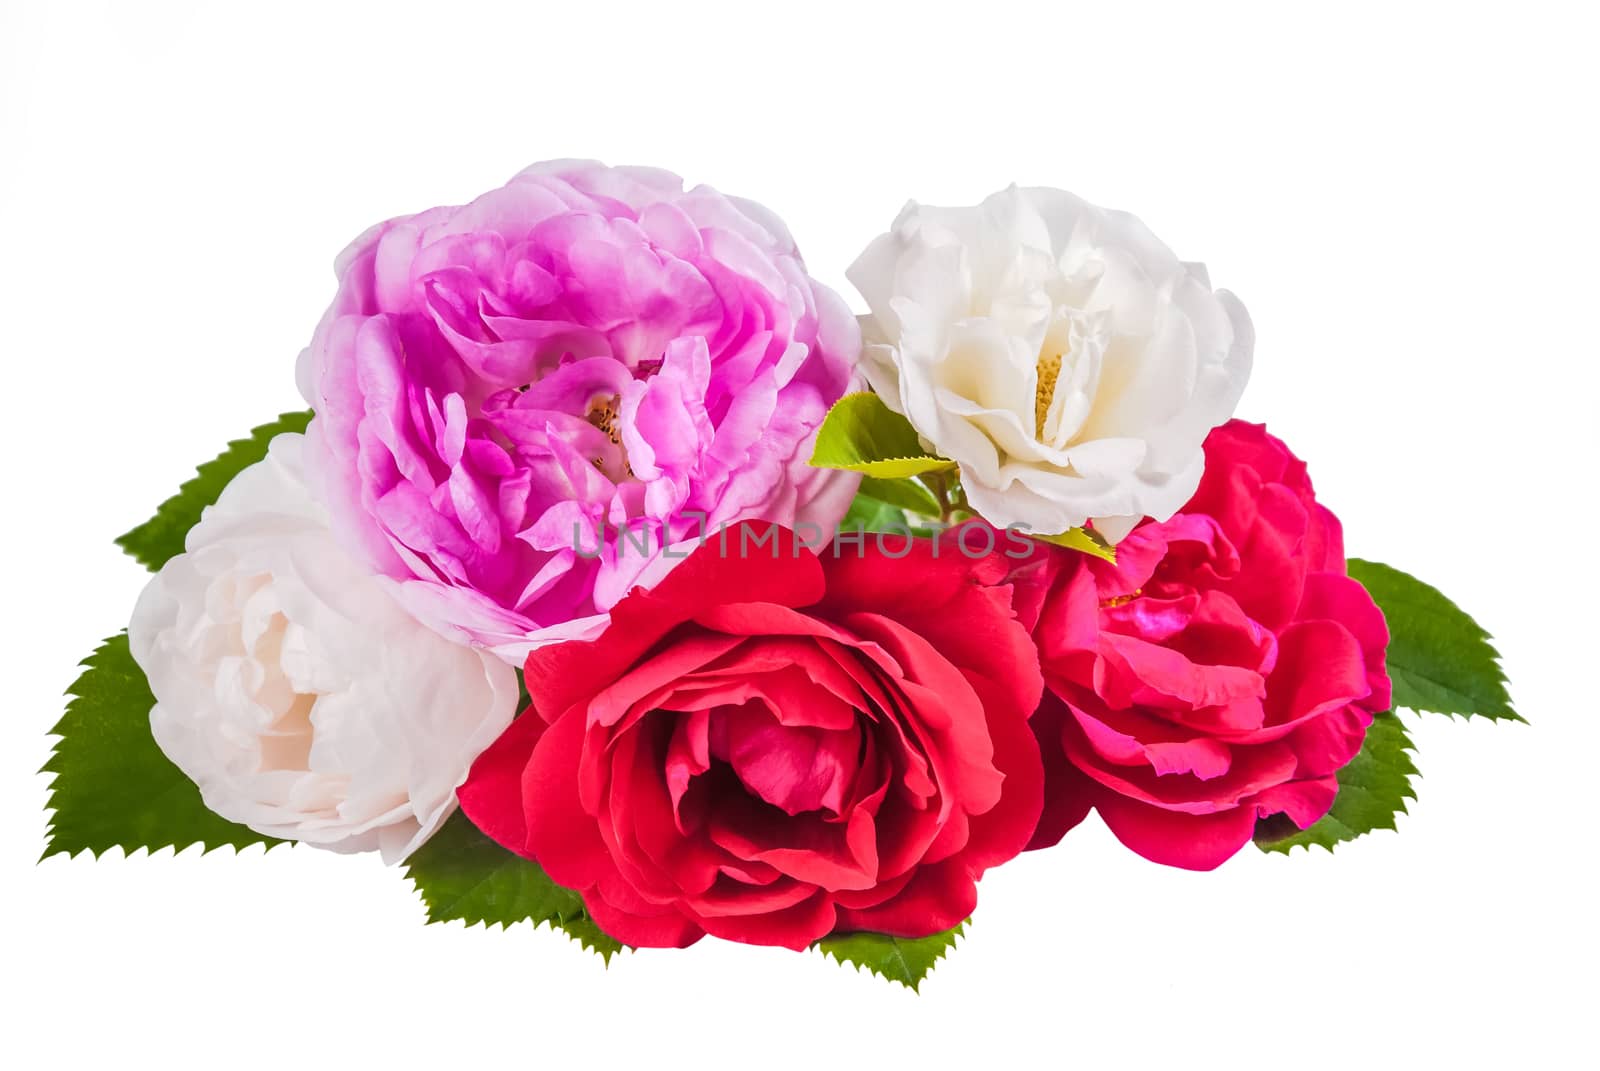 Rose colorful flowers with leaves isolated on white backround